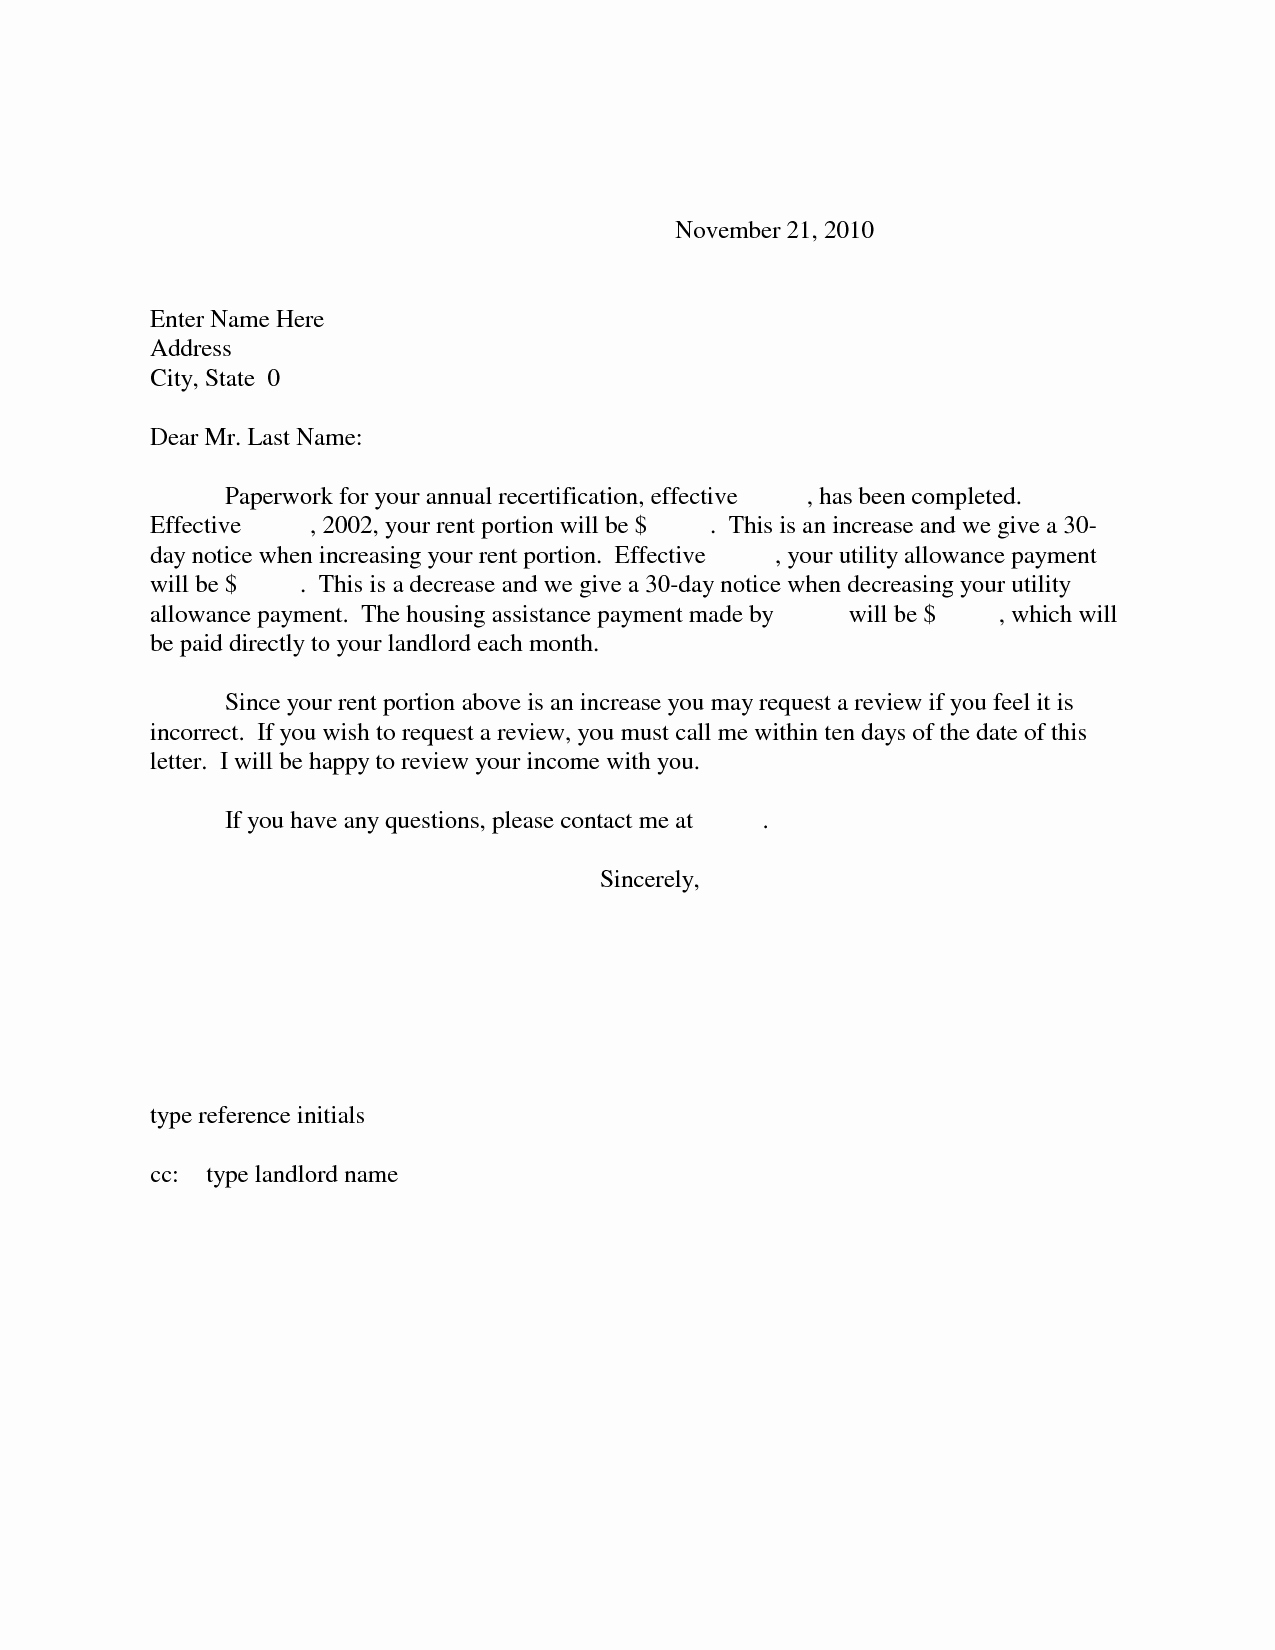 Rent Increase Letter New Best S Of Rent Increase Letter to Tenant In